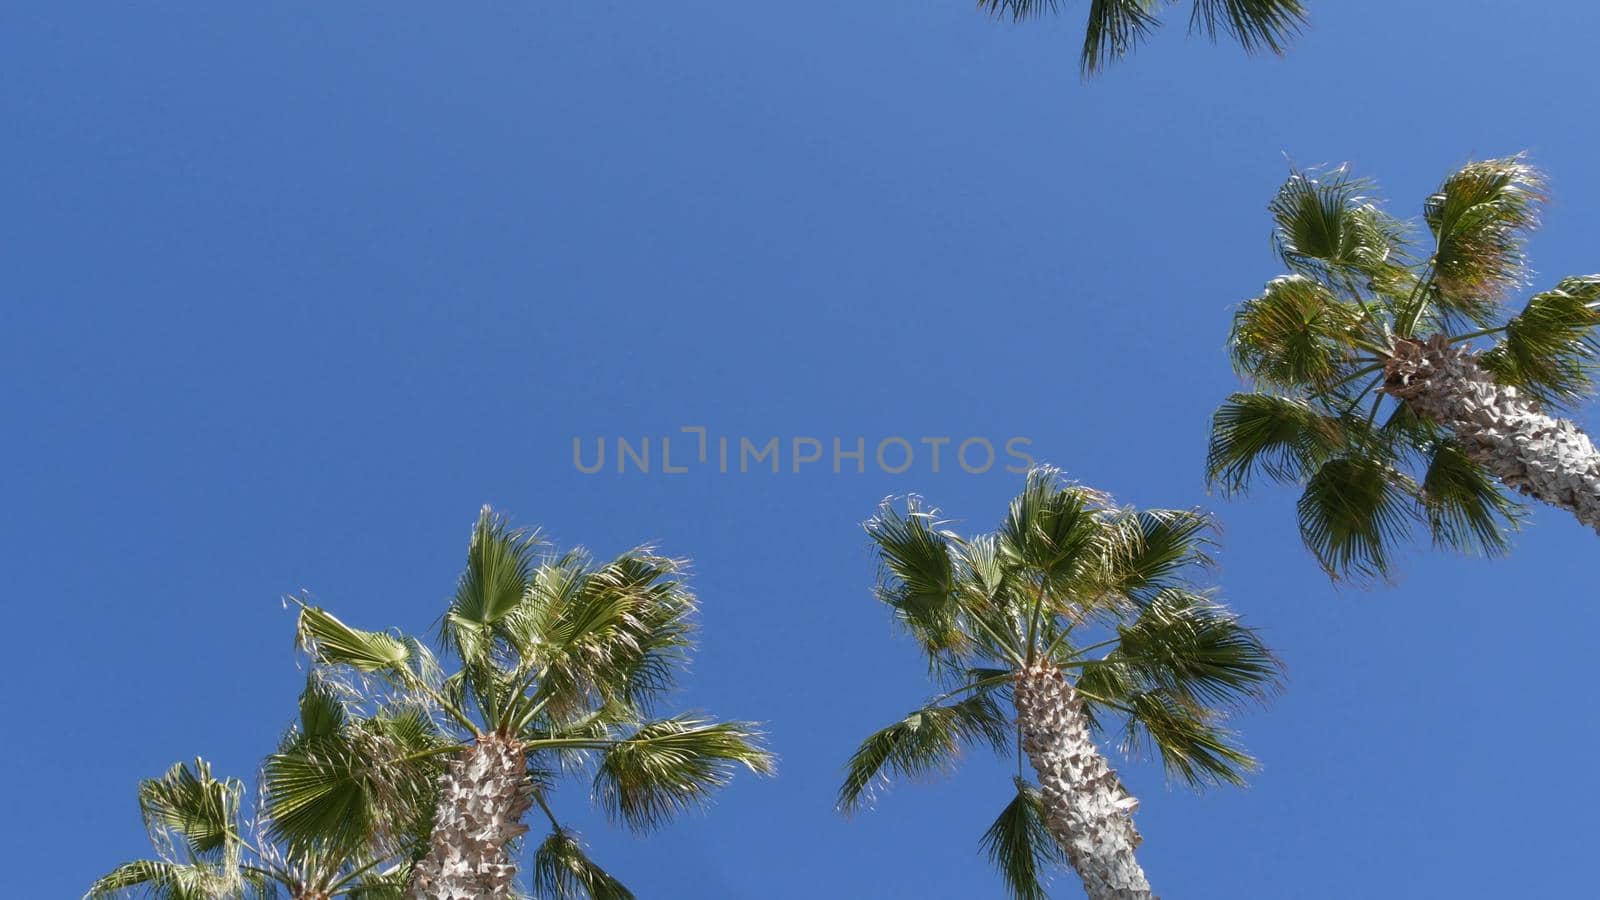 Palms in Los Angeles, California, USA. Summertime aesthetic of Santa Monica and Venice Beach on Pacific ocean. Clear blue sky and iconic palm trees. Atmosphere of Beverly Hills in Hollywood. LA vibes by DogoraSun